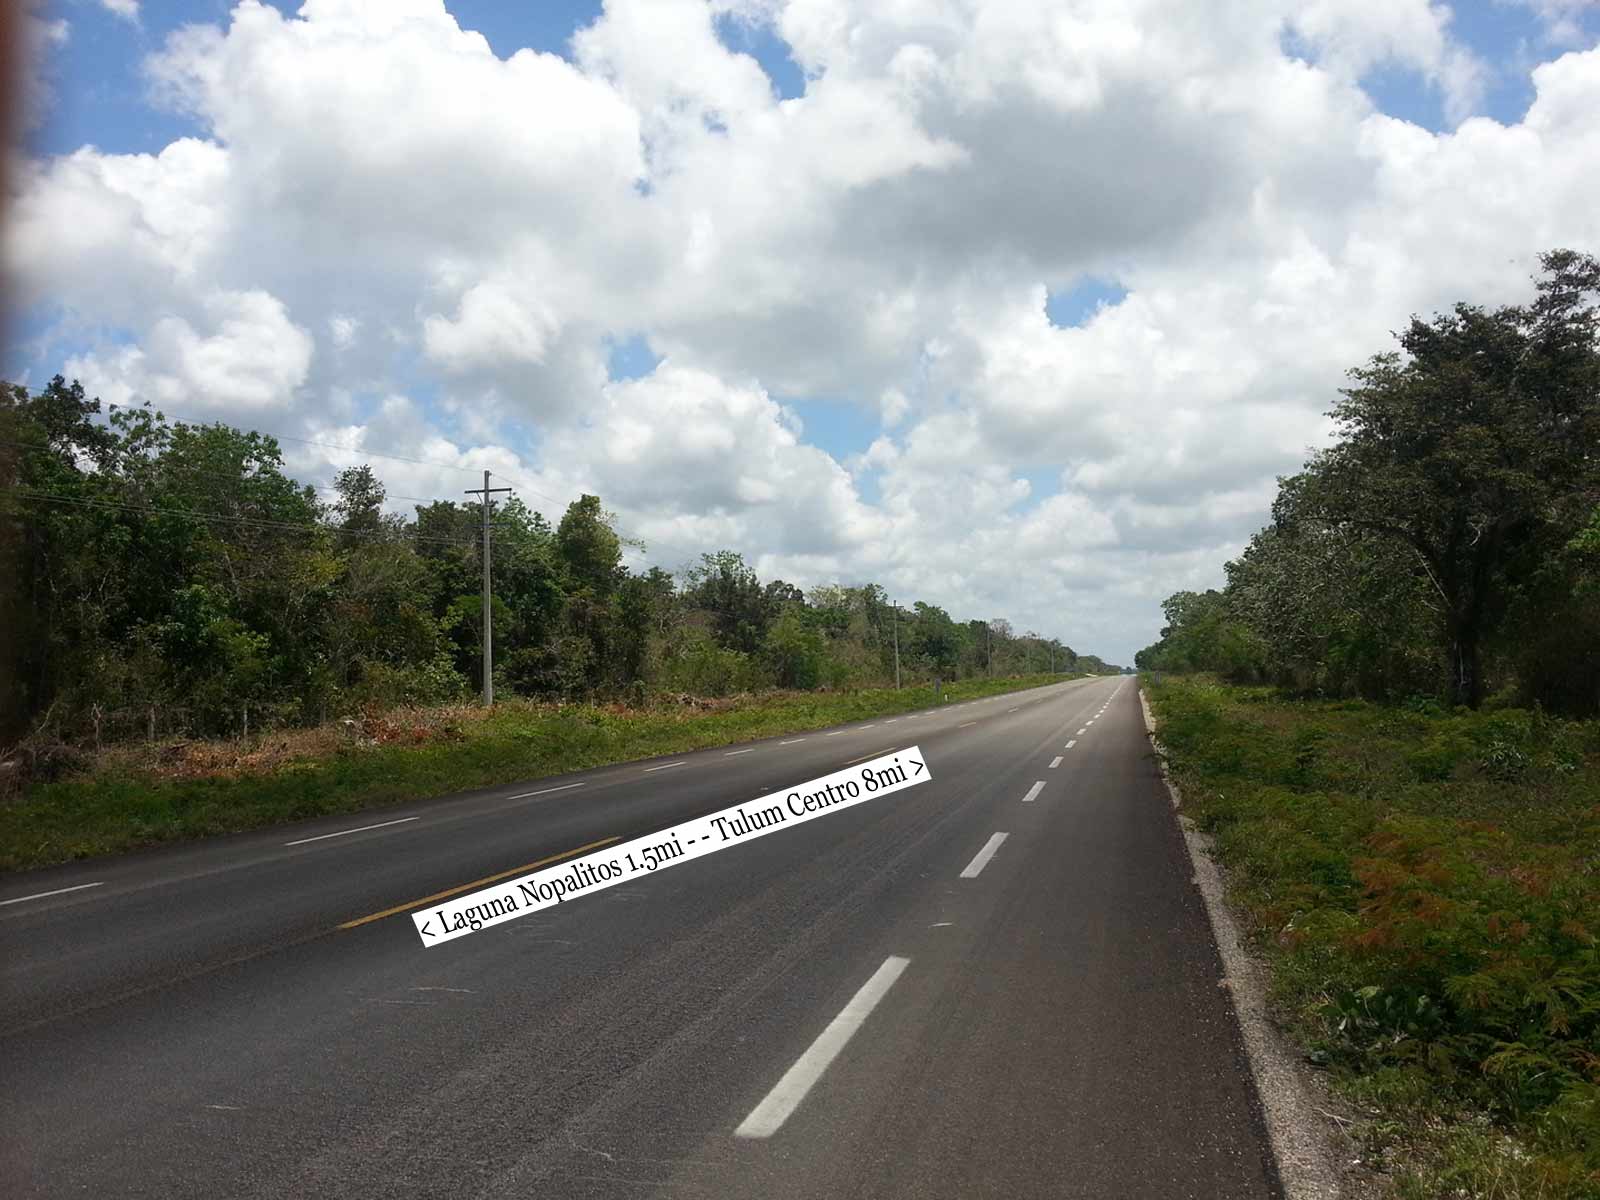 19 acres for sale on the highway - tulum county mexico